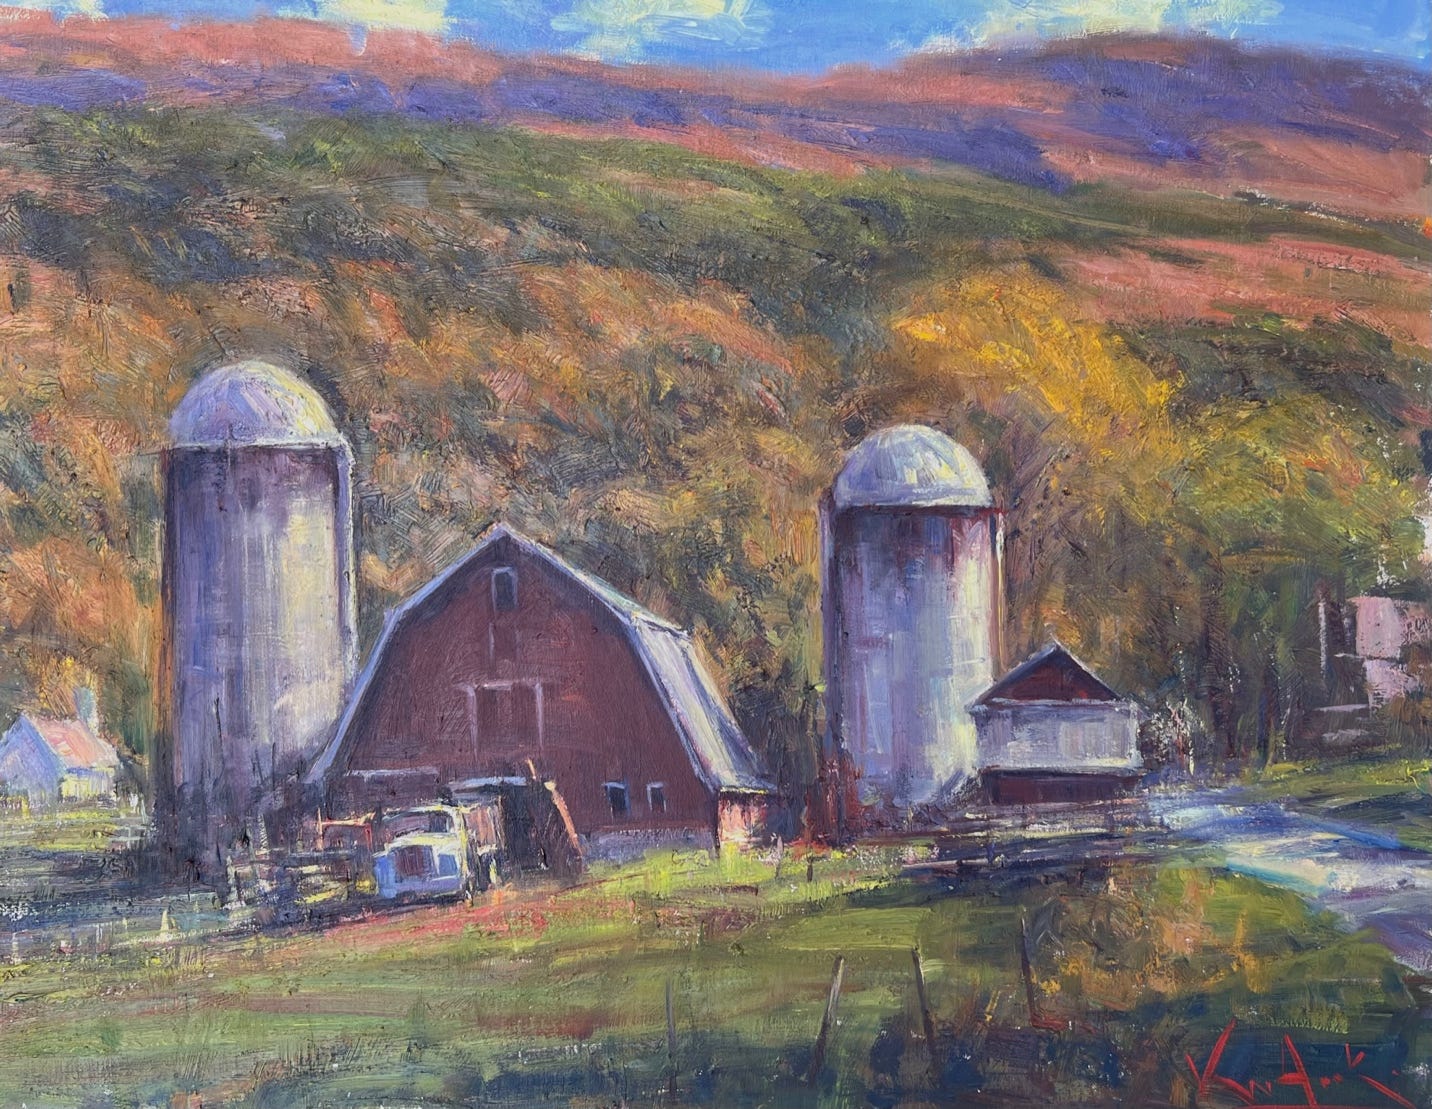 A painting of a farm with silos

Description automatically generated